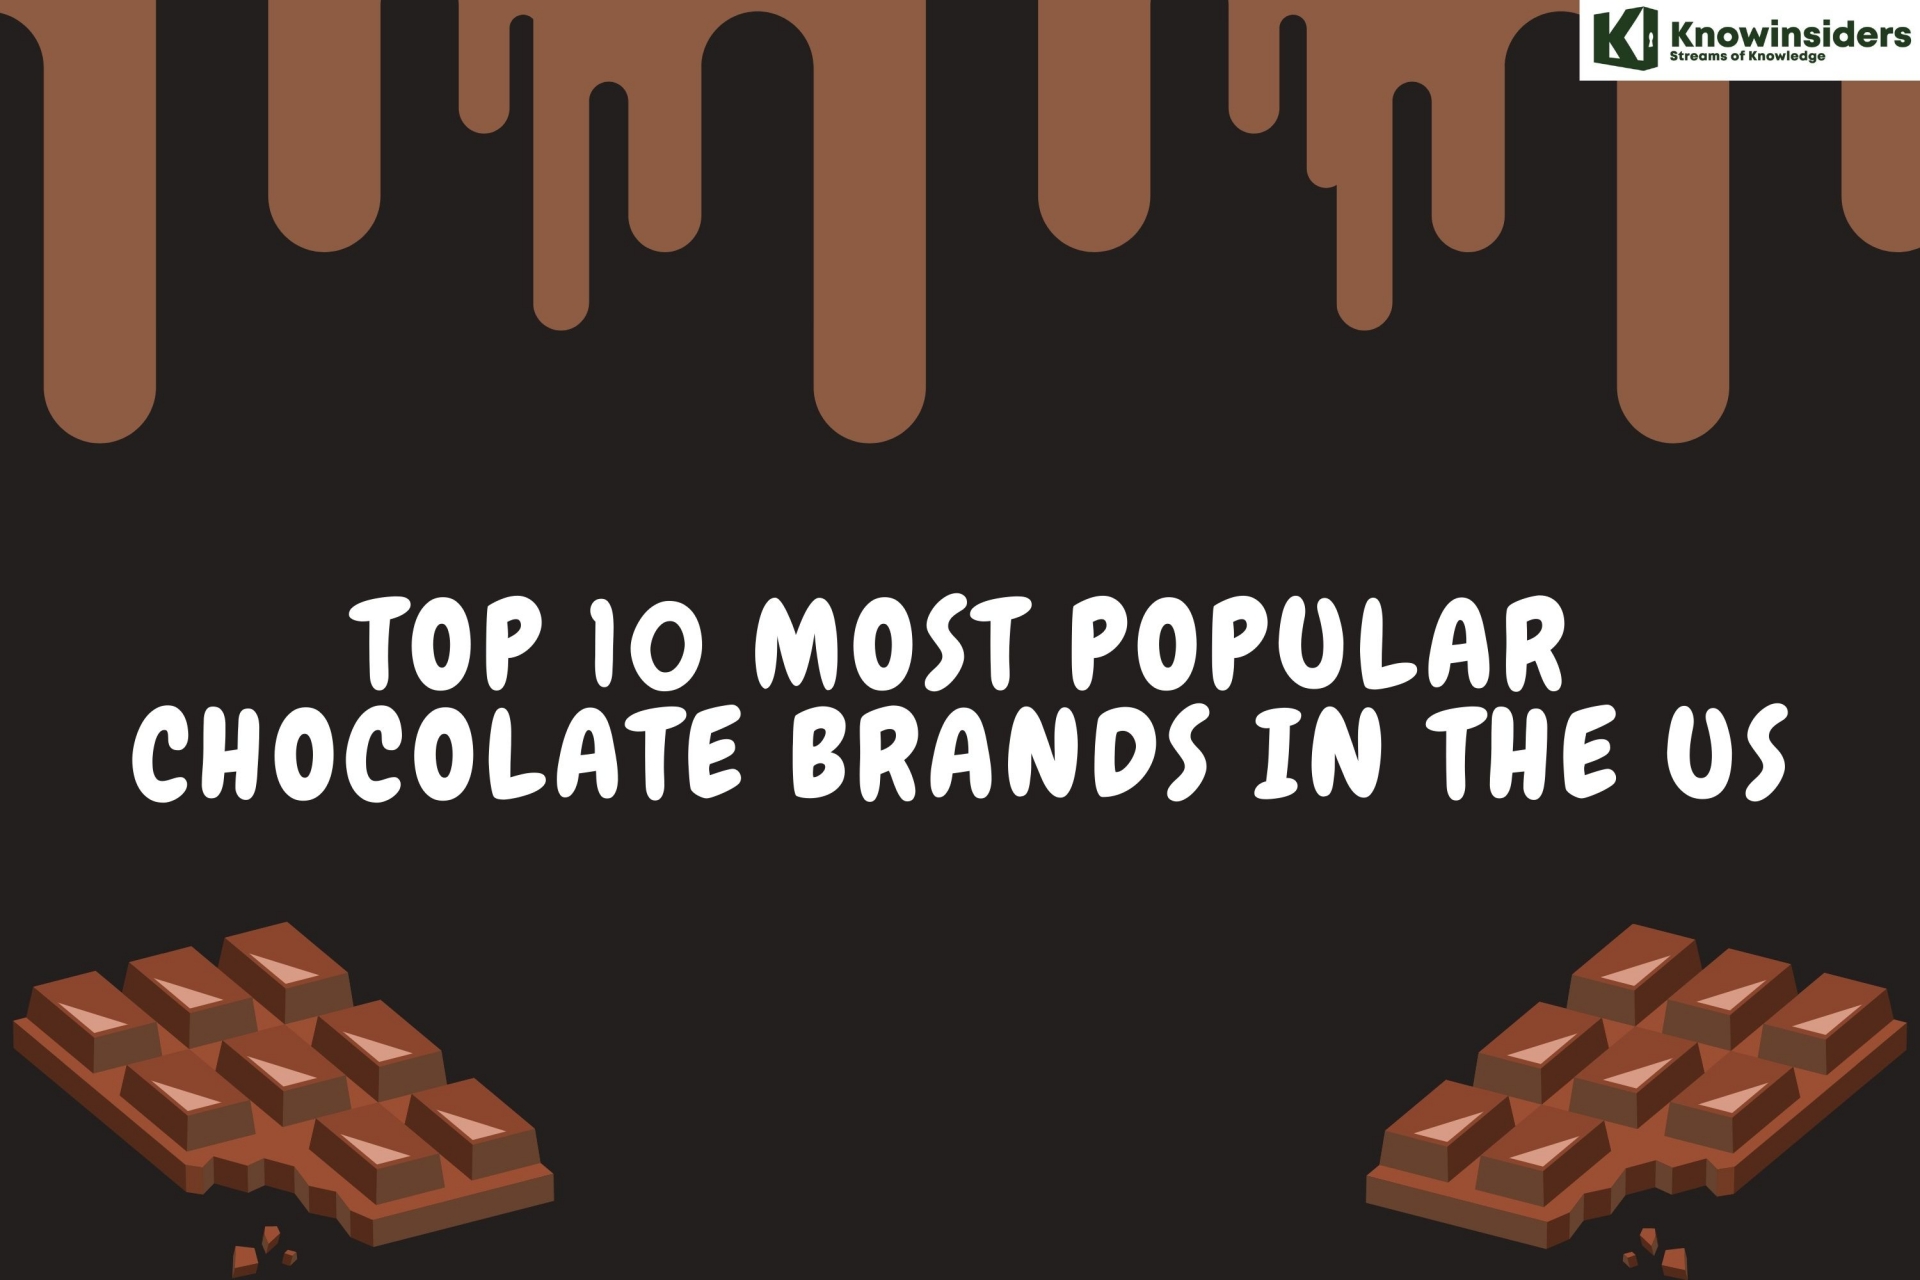 Top 10 Most Popular Chocolate Brands in The US